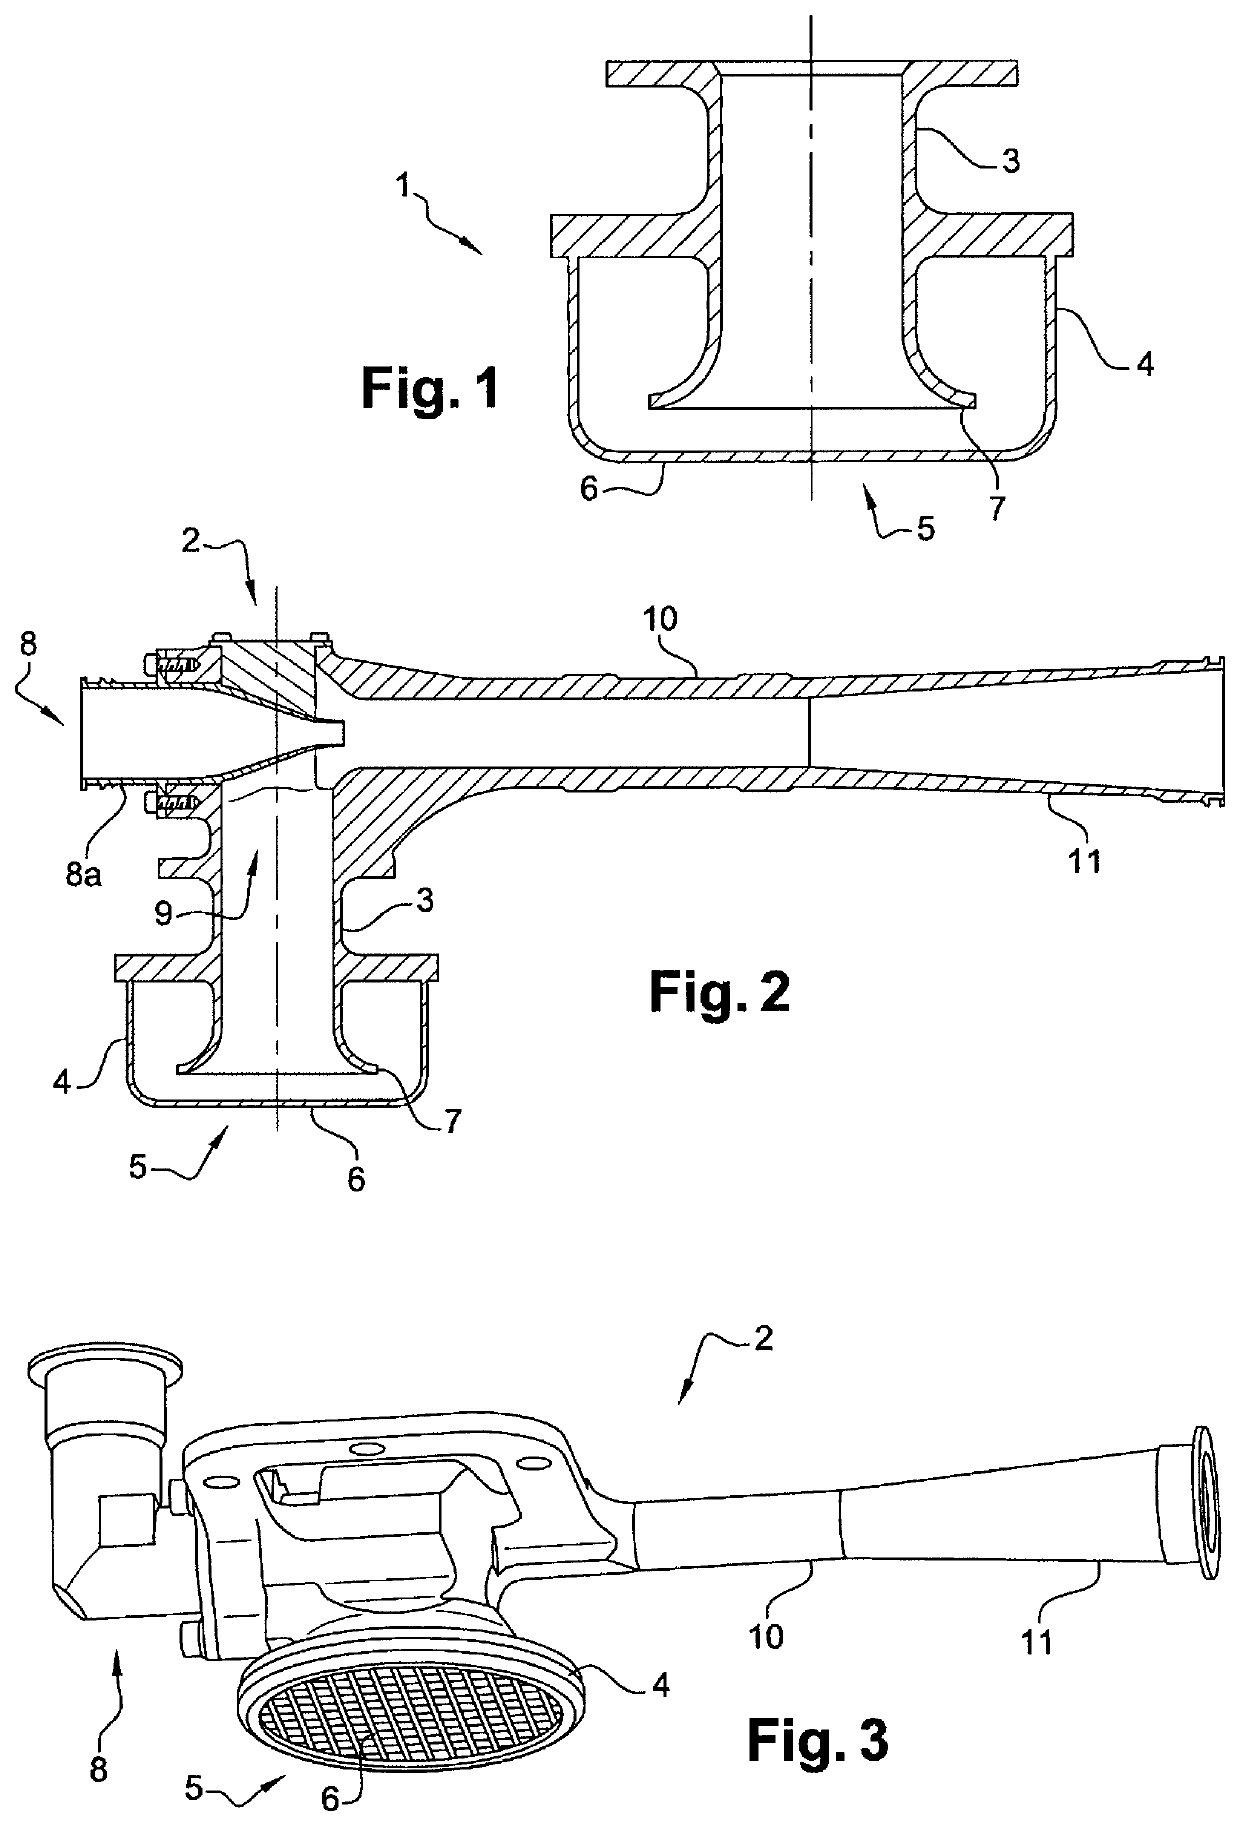 Method of manufacturing a strainer, a strainer, and an ejector comprising such a strainer